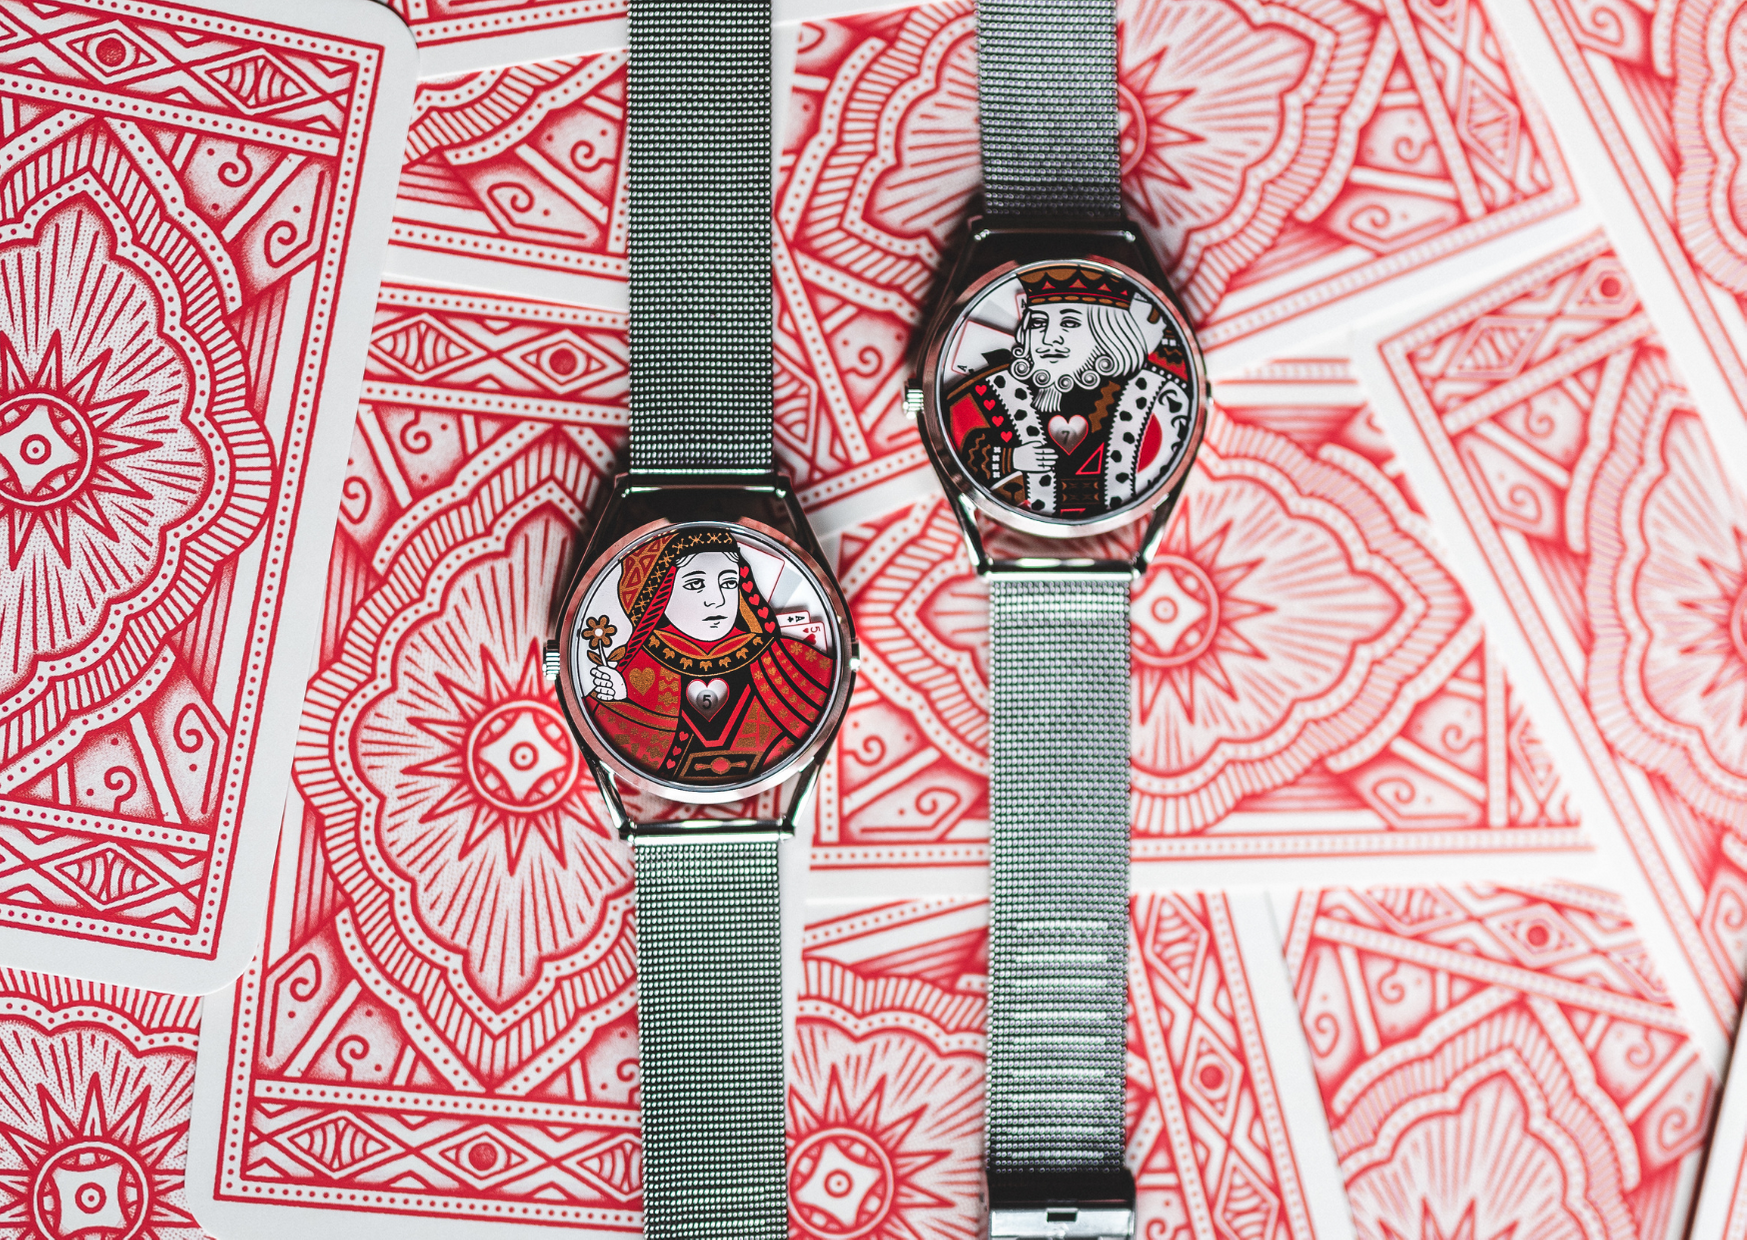 King and Queen watches